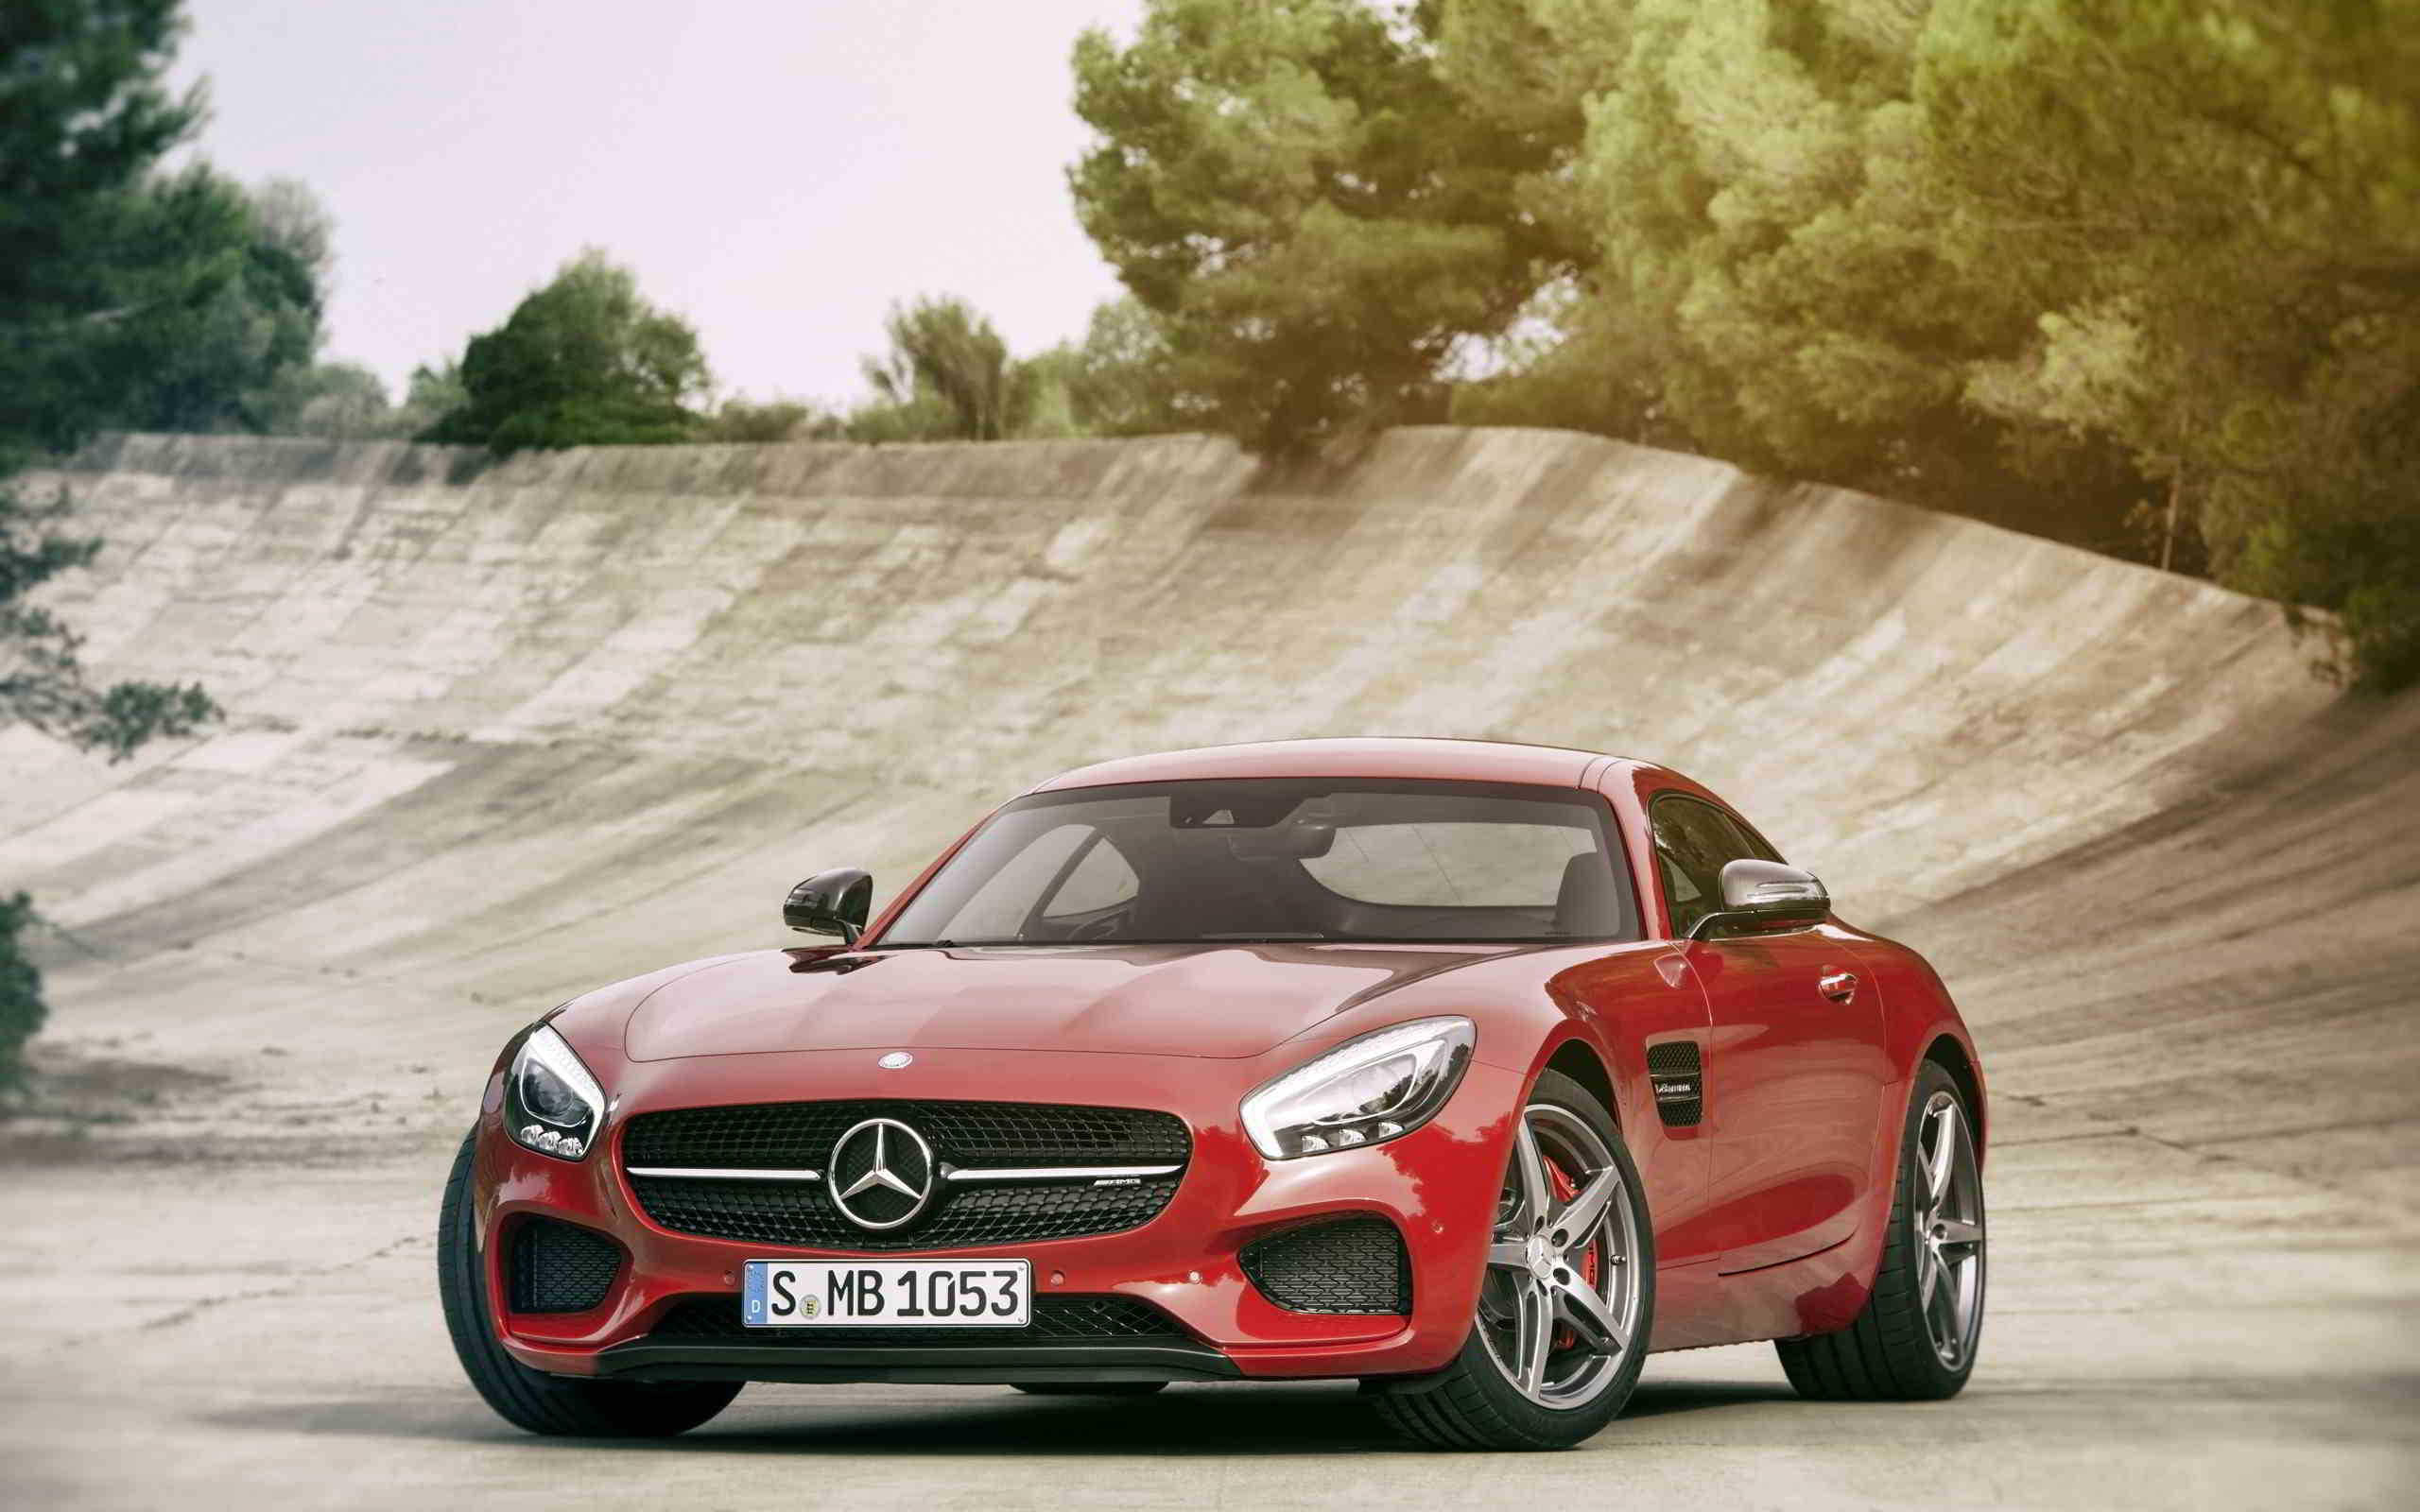 cars hd wallpapers for laptop,land vehicle,vehicle,car,performance car,mercedes benz sls amg